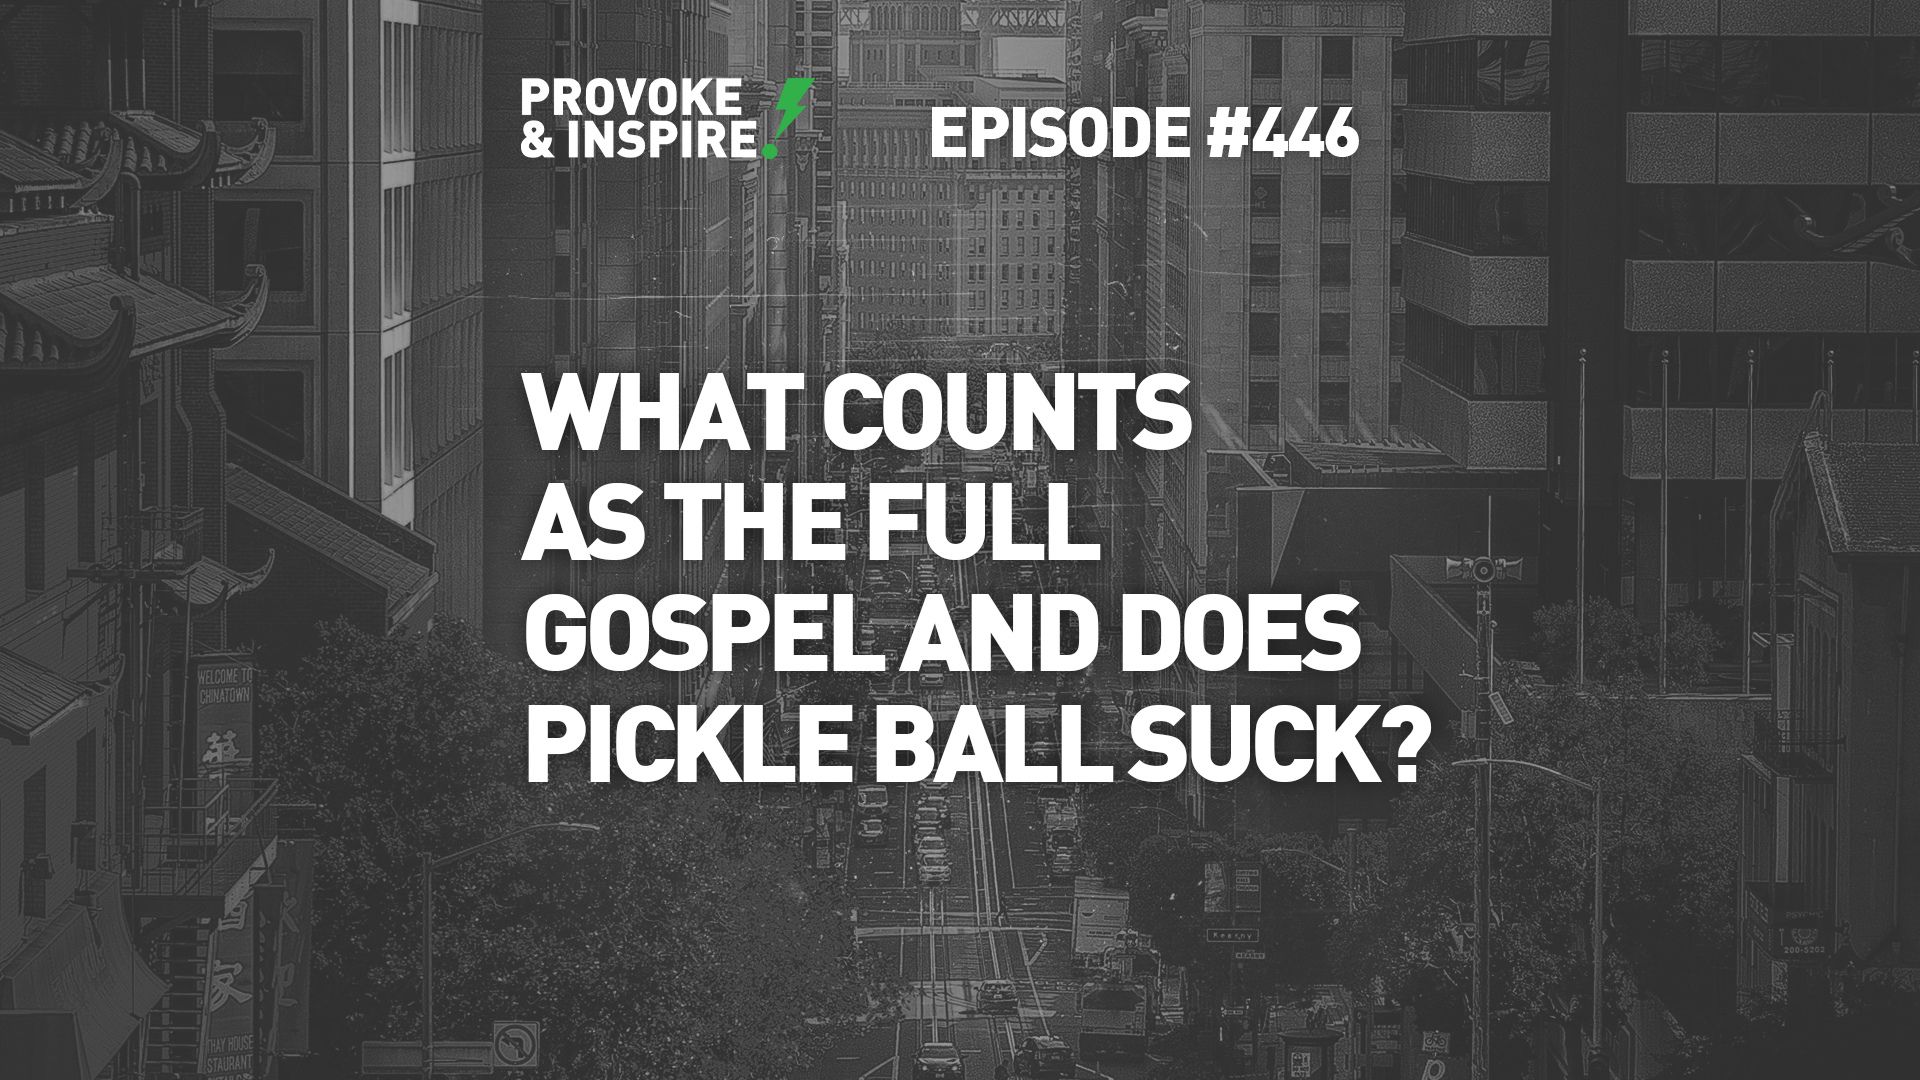 Episode 446: What Counts as the Full Gospel and Does Pickle Ball Suck?